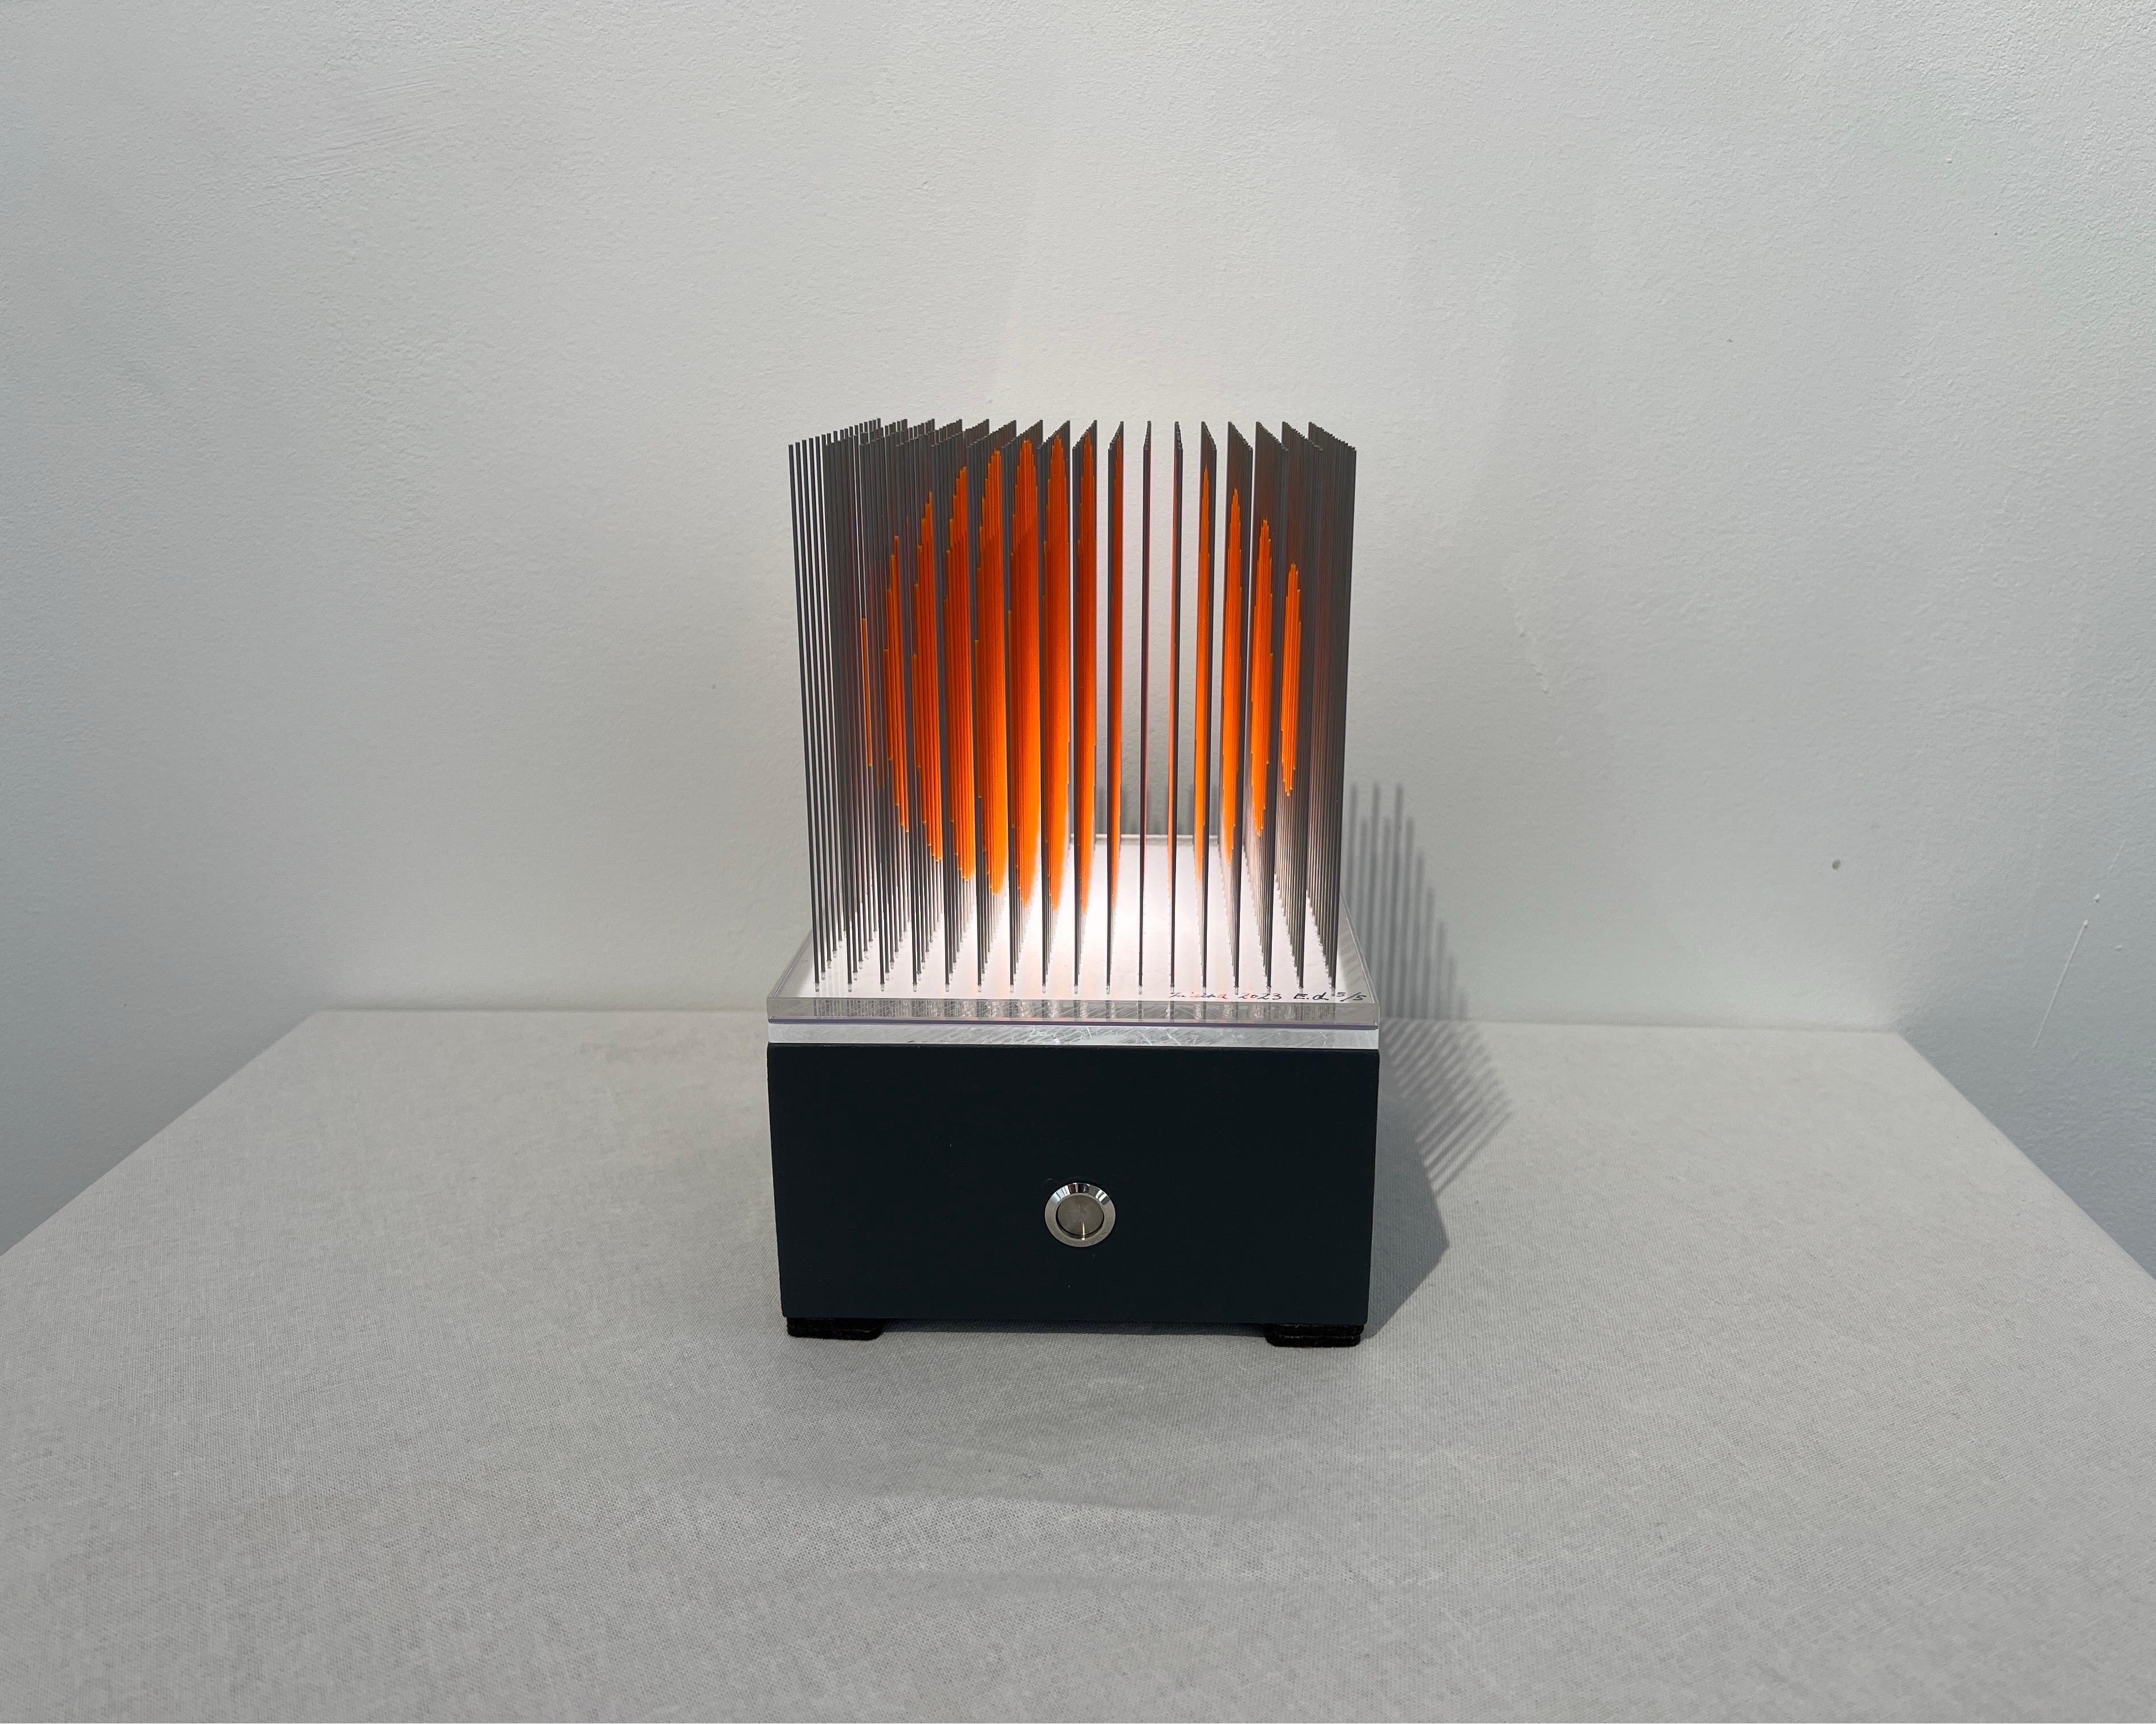 Acrylic on stainless steel needles, entirely hand done, on led pedestal (comes extra!).
Yoshiyuki Miura is a kinetic art (optical  art) Master, highly collectable. This piece is light by a LED pedestal, which comes extra. The overall dimensions are